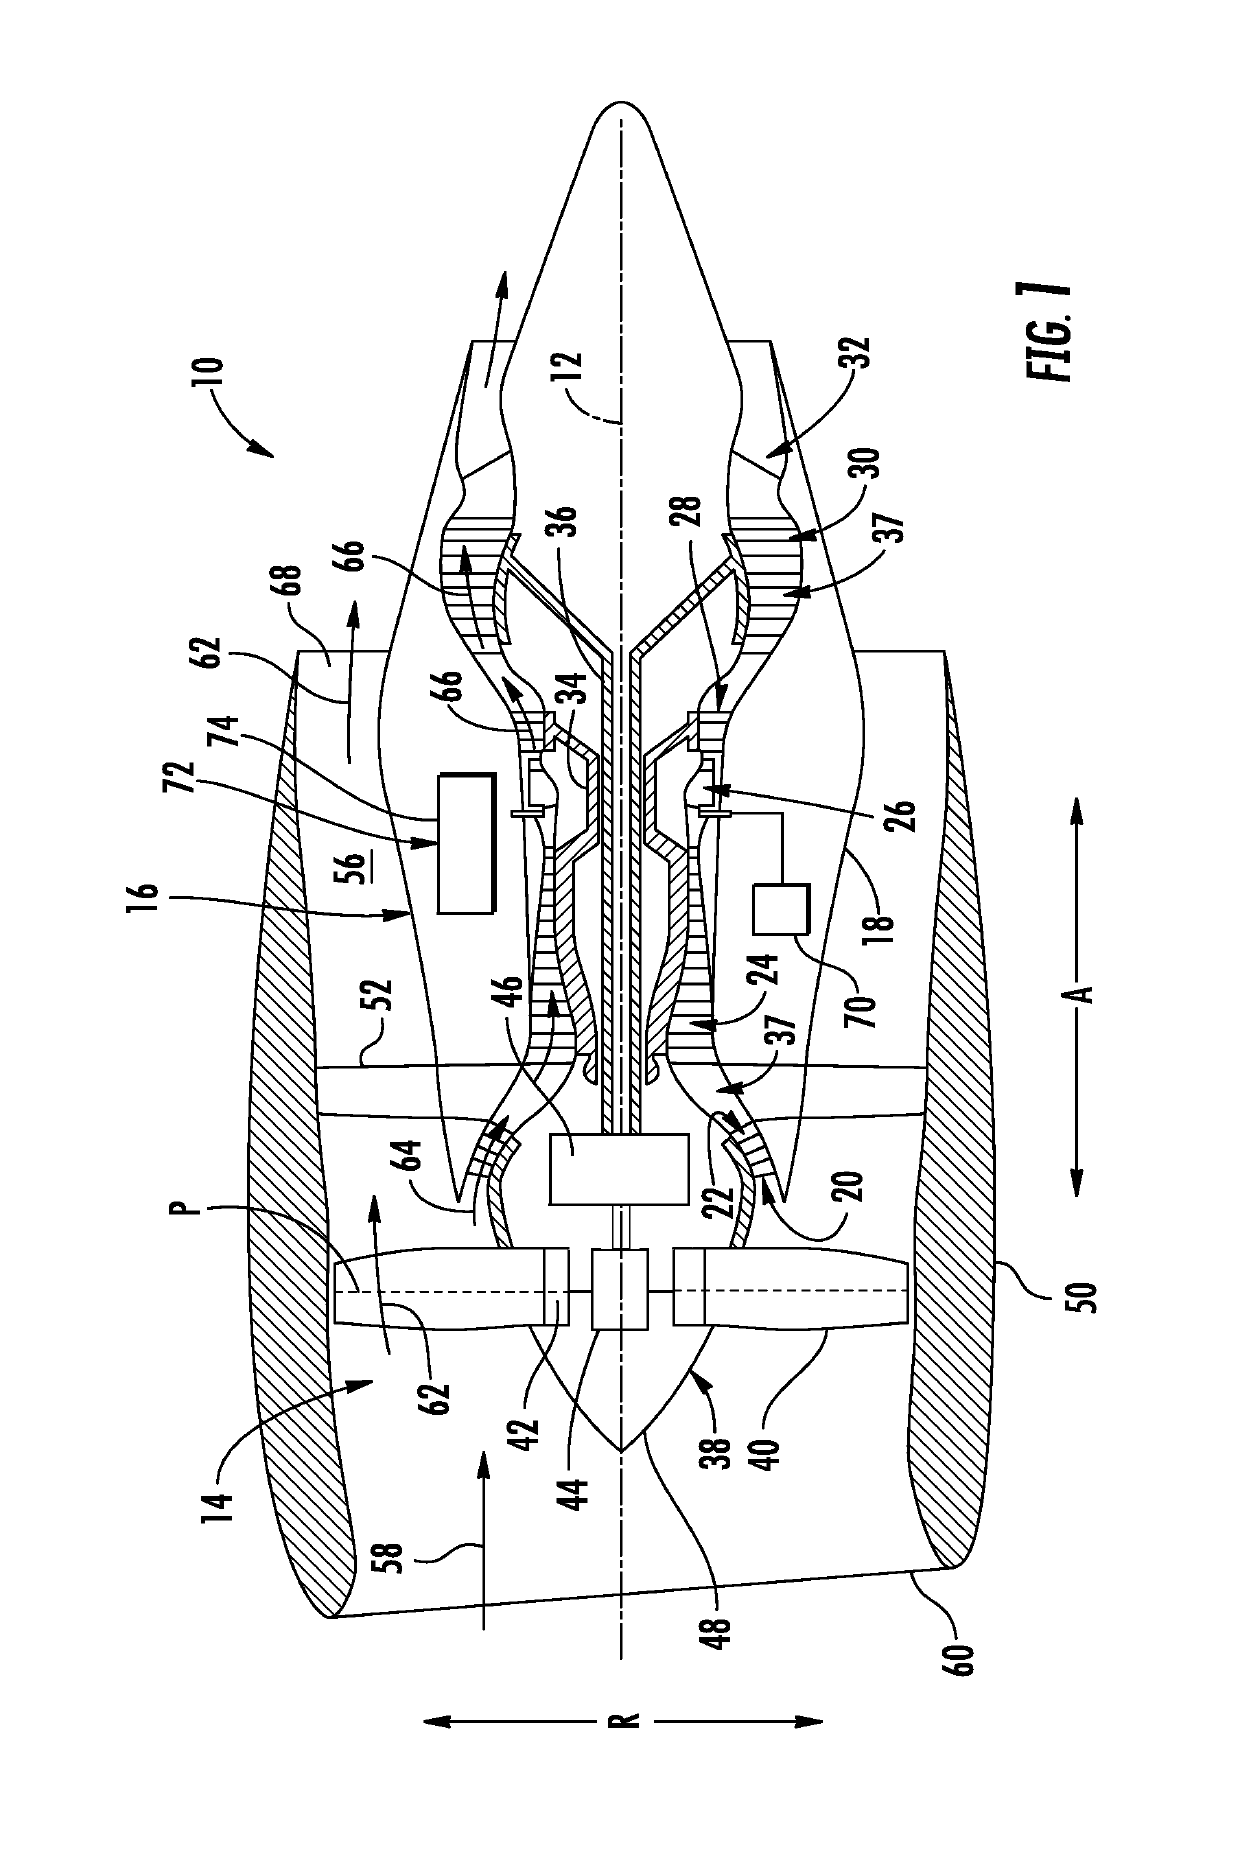 Air Cycle Assembly for a Gas Turbine Engine Assembly